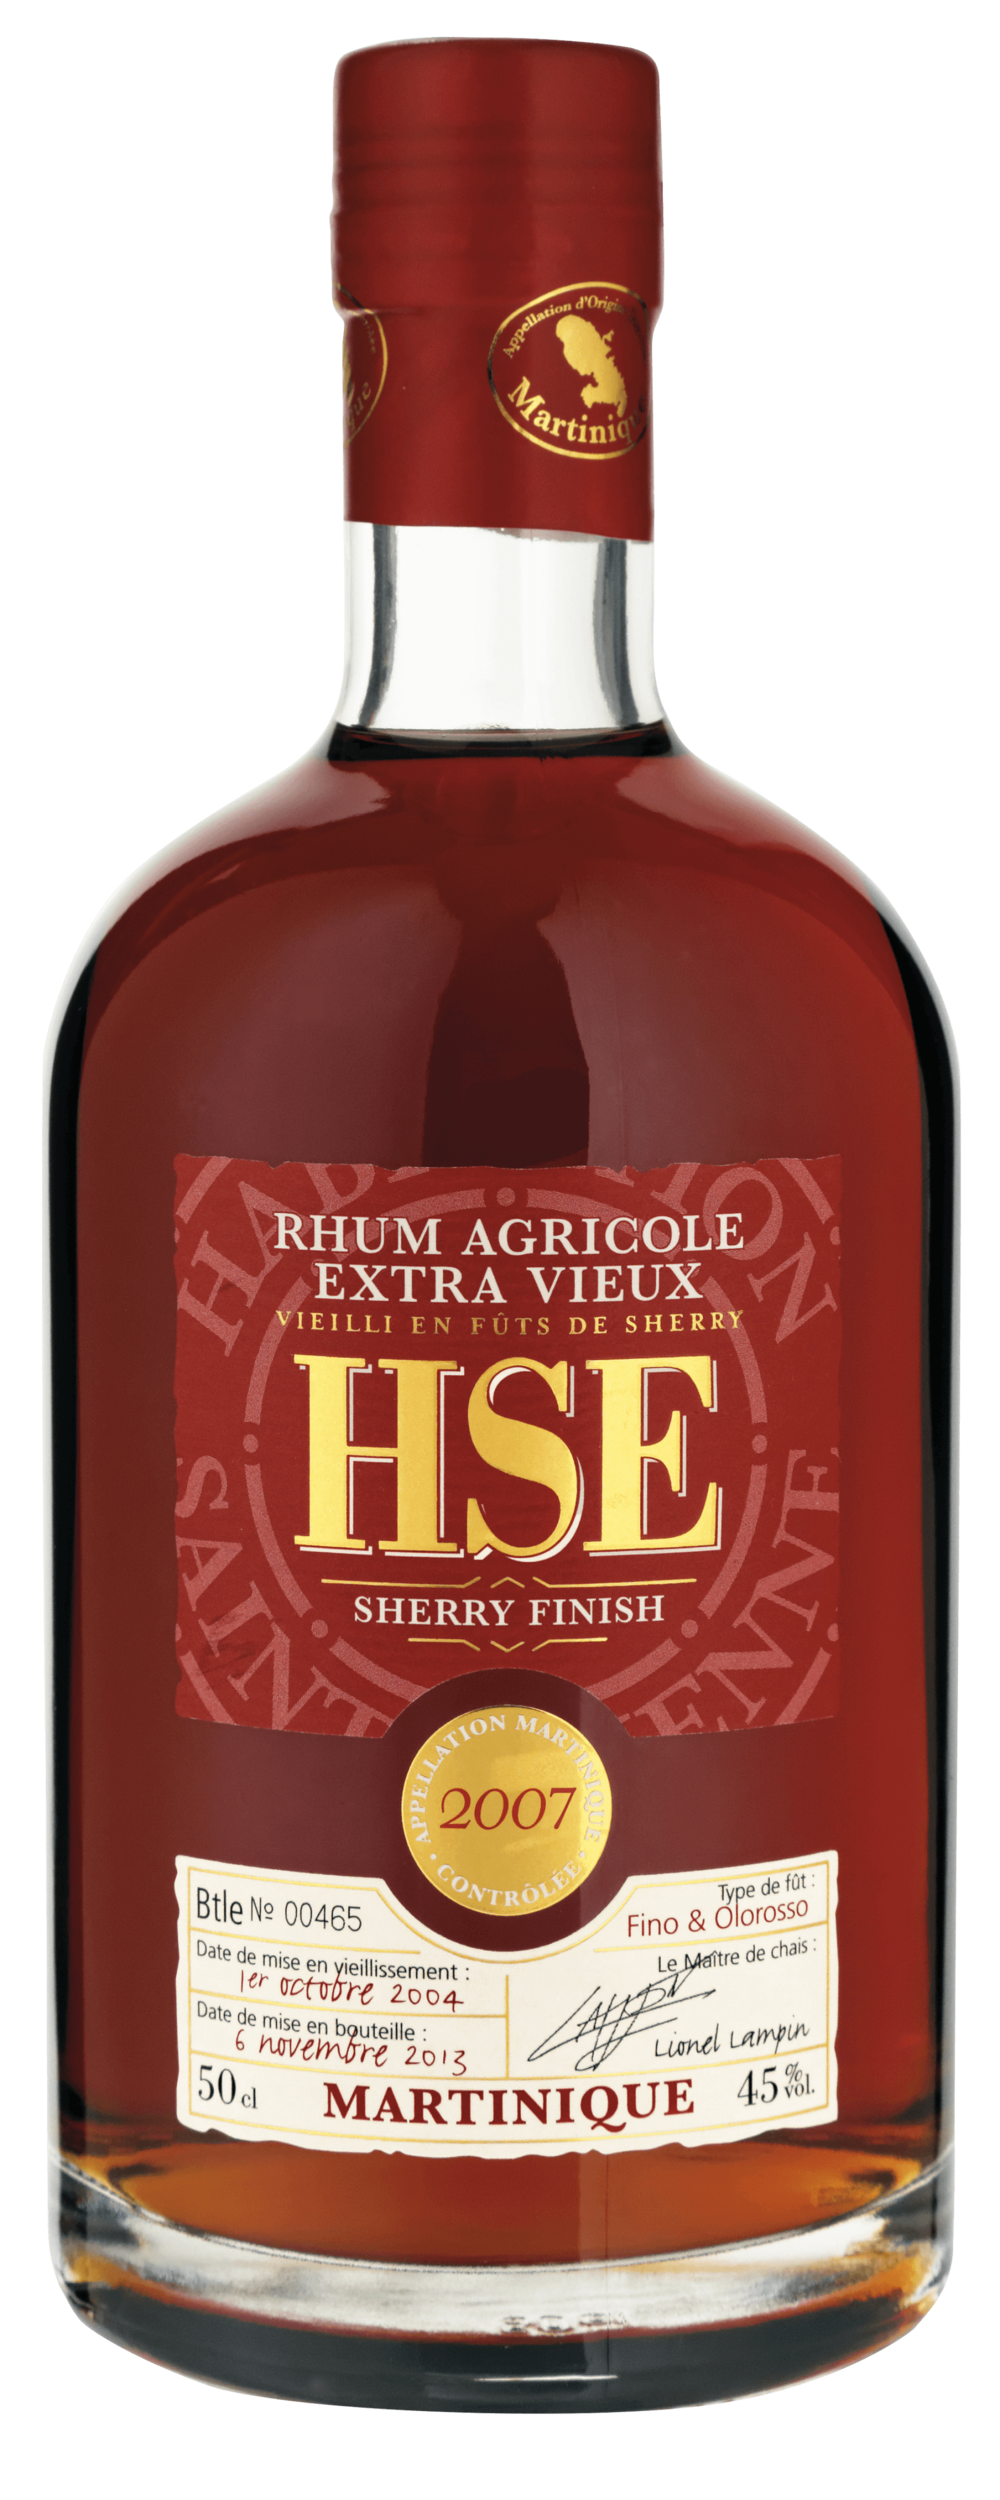 HSE, EXTRA VIEUX SHERRY FINISH 2007